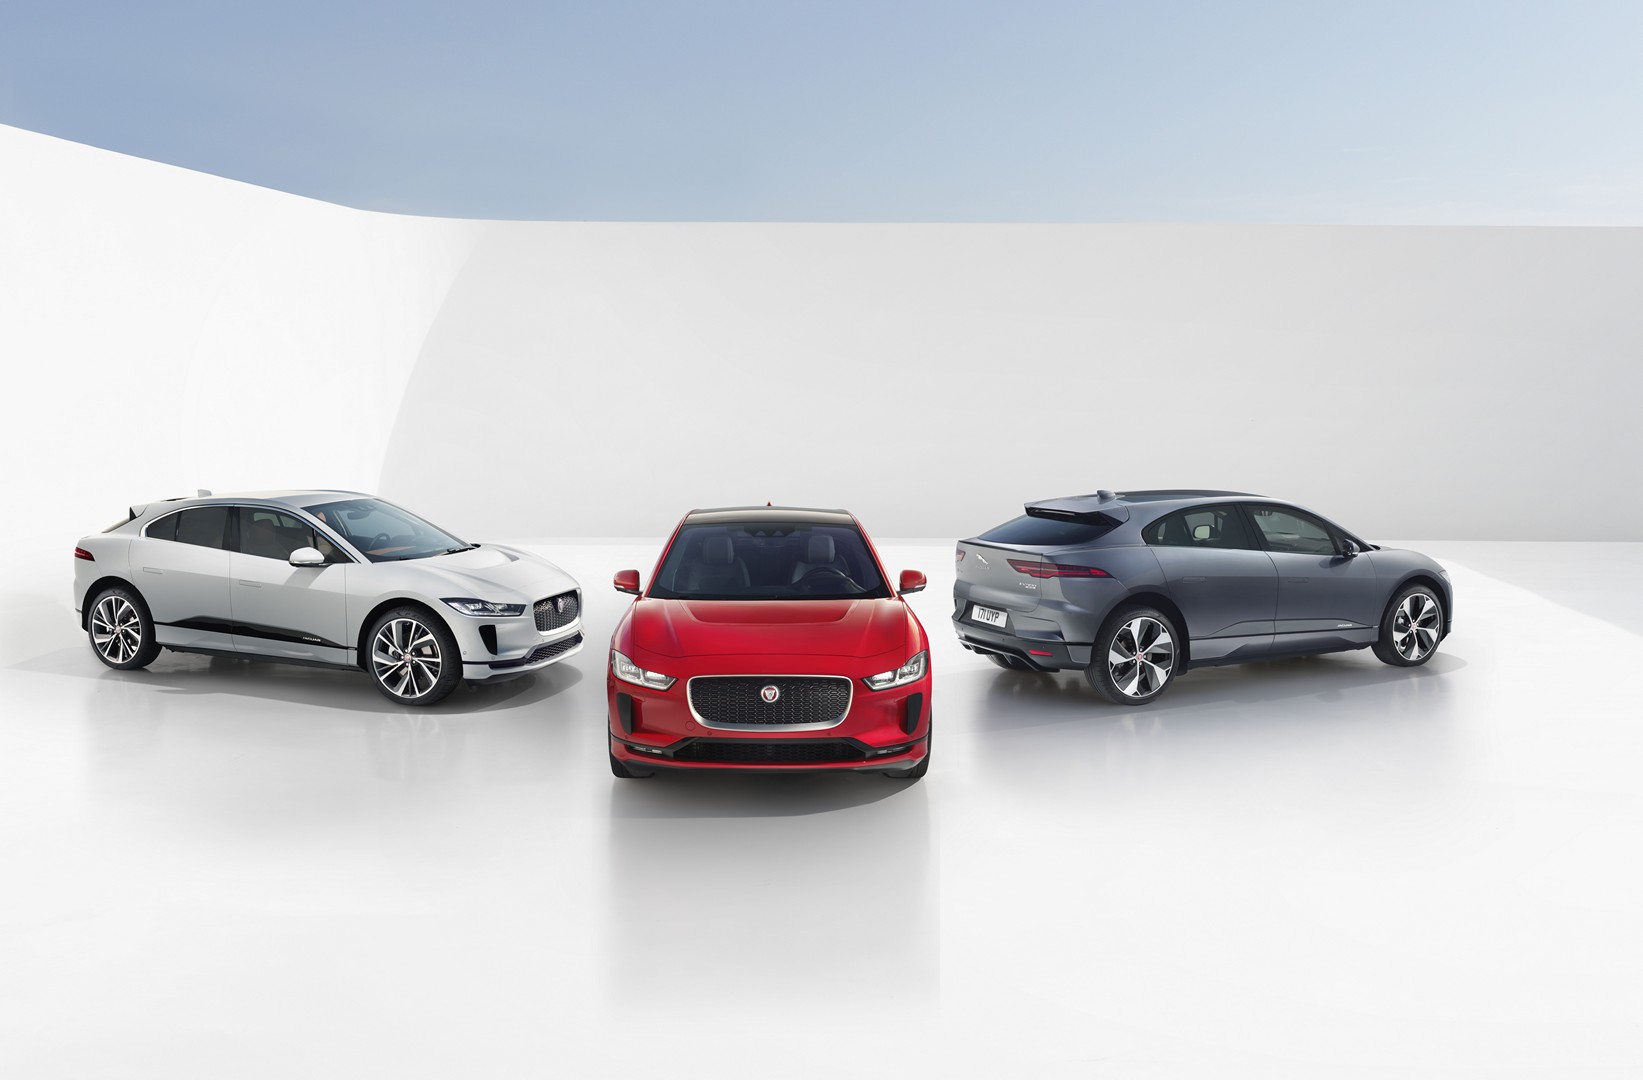 https://s1.cdn.autoevolution.com/images/news/gallery/2020-jaguar-i-pace-update-offers-234-miles-of-range-thanks-to-etrophy-know-how_2.jpg